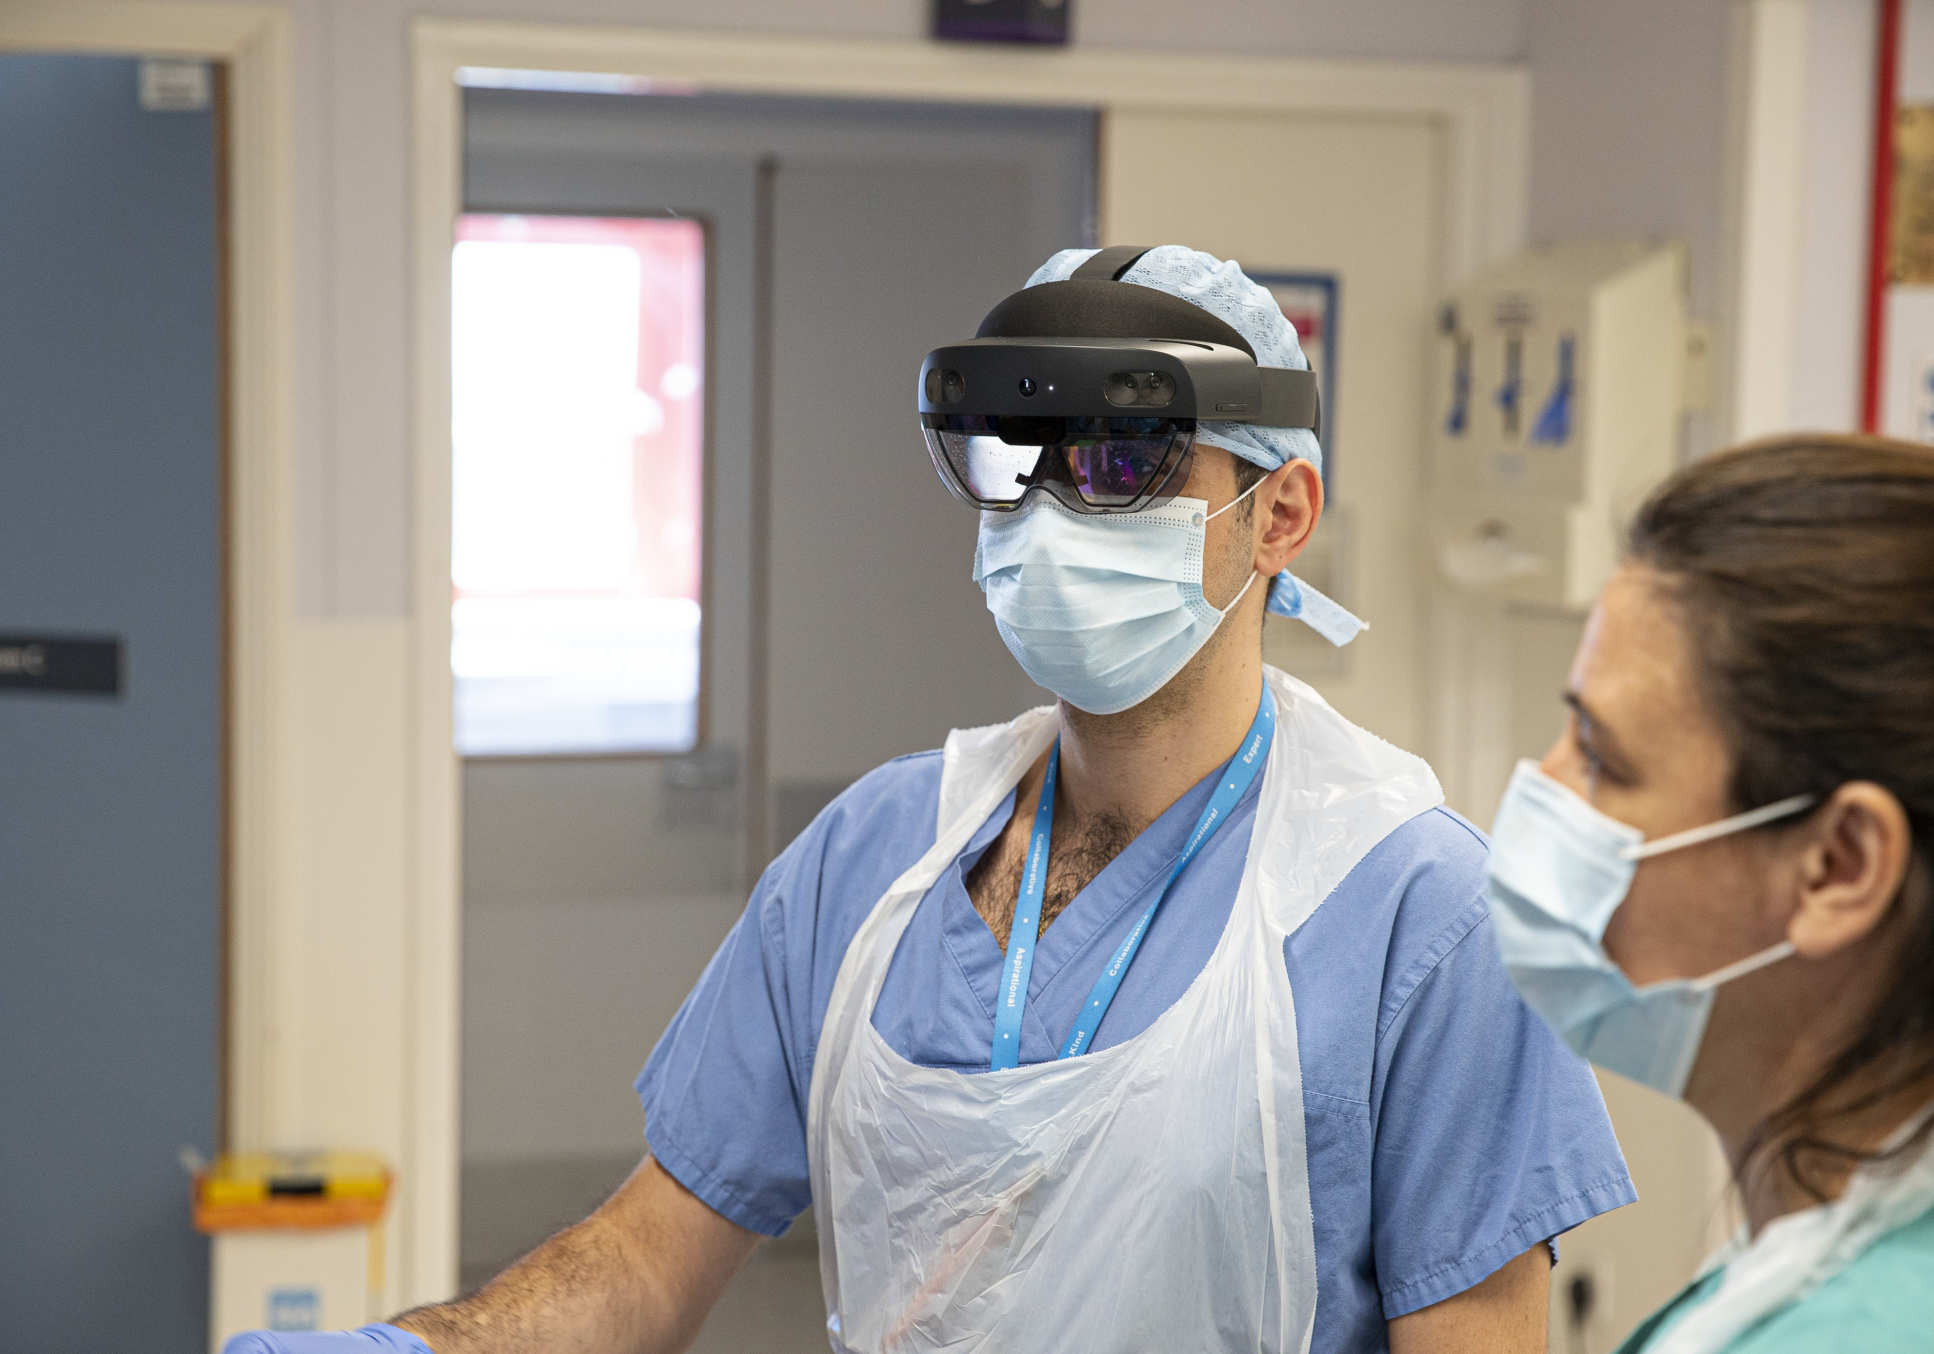 A photogrph of two doctors, one wearing a HoloLens headset